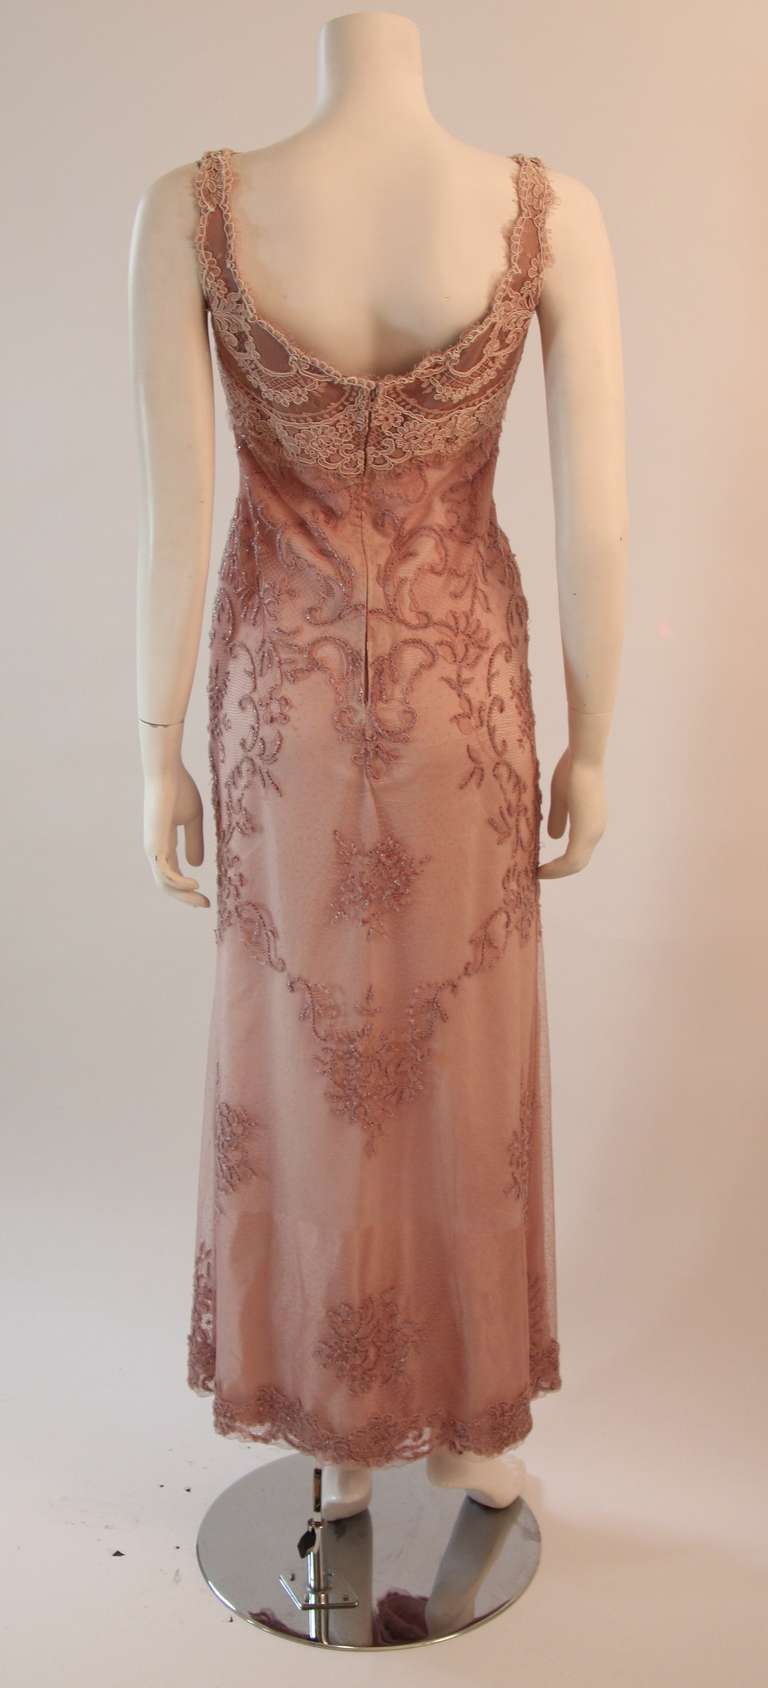 Badgley Mischka Beaded Lace Overlay Blush Pink Gown Size 4 2